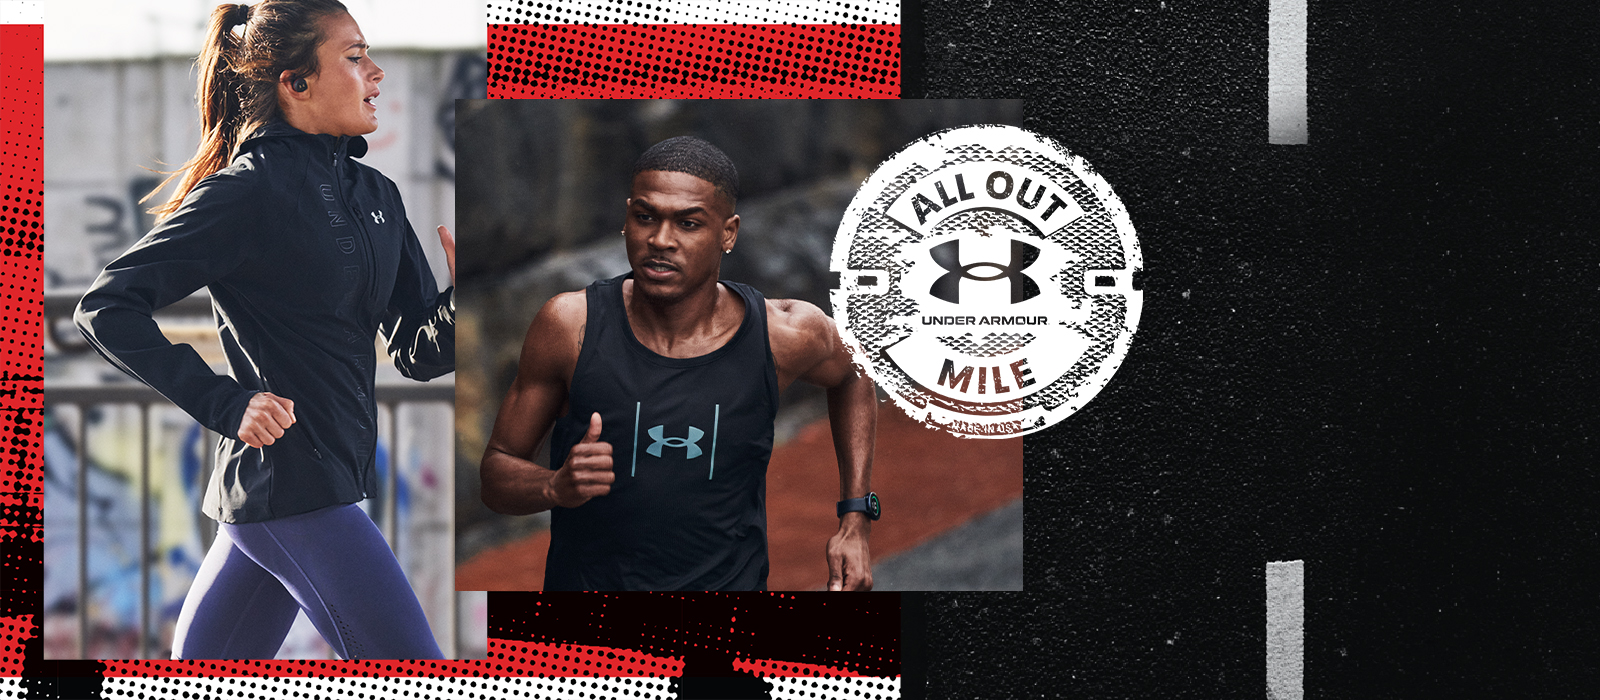 All Out Mile - Under Armour